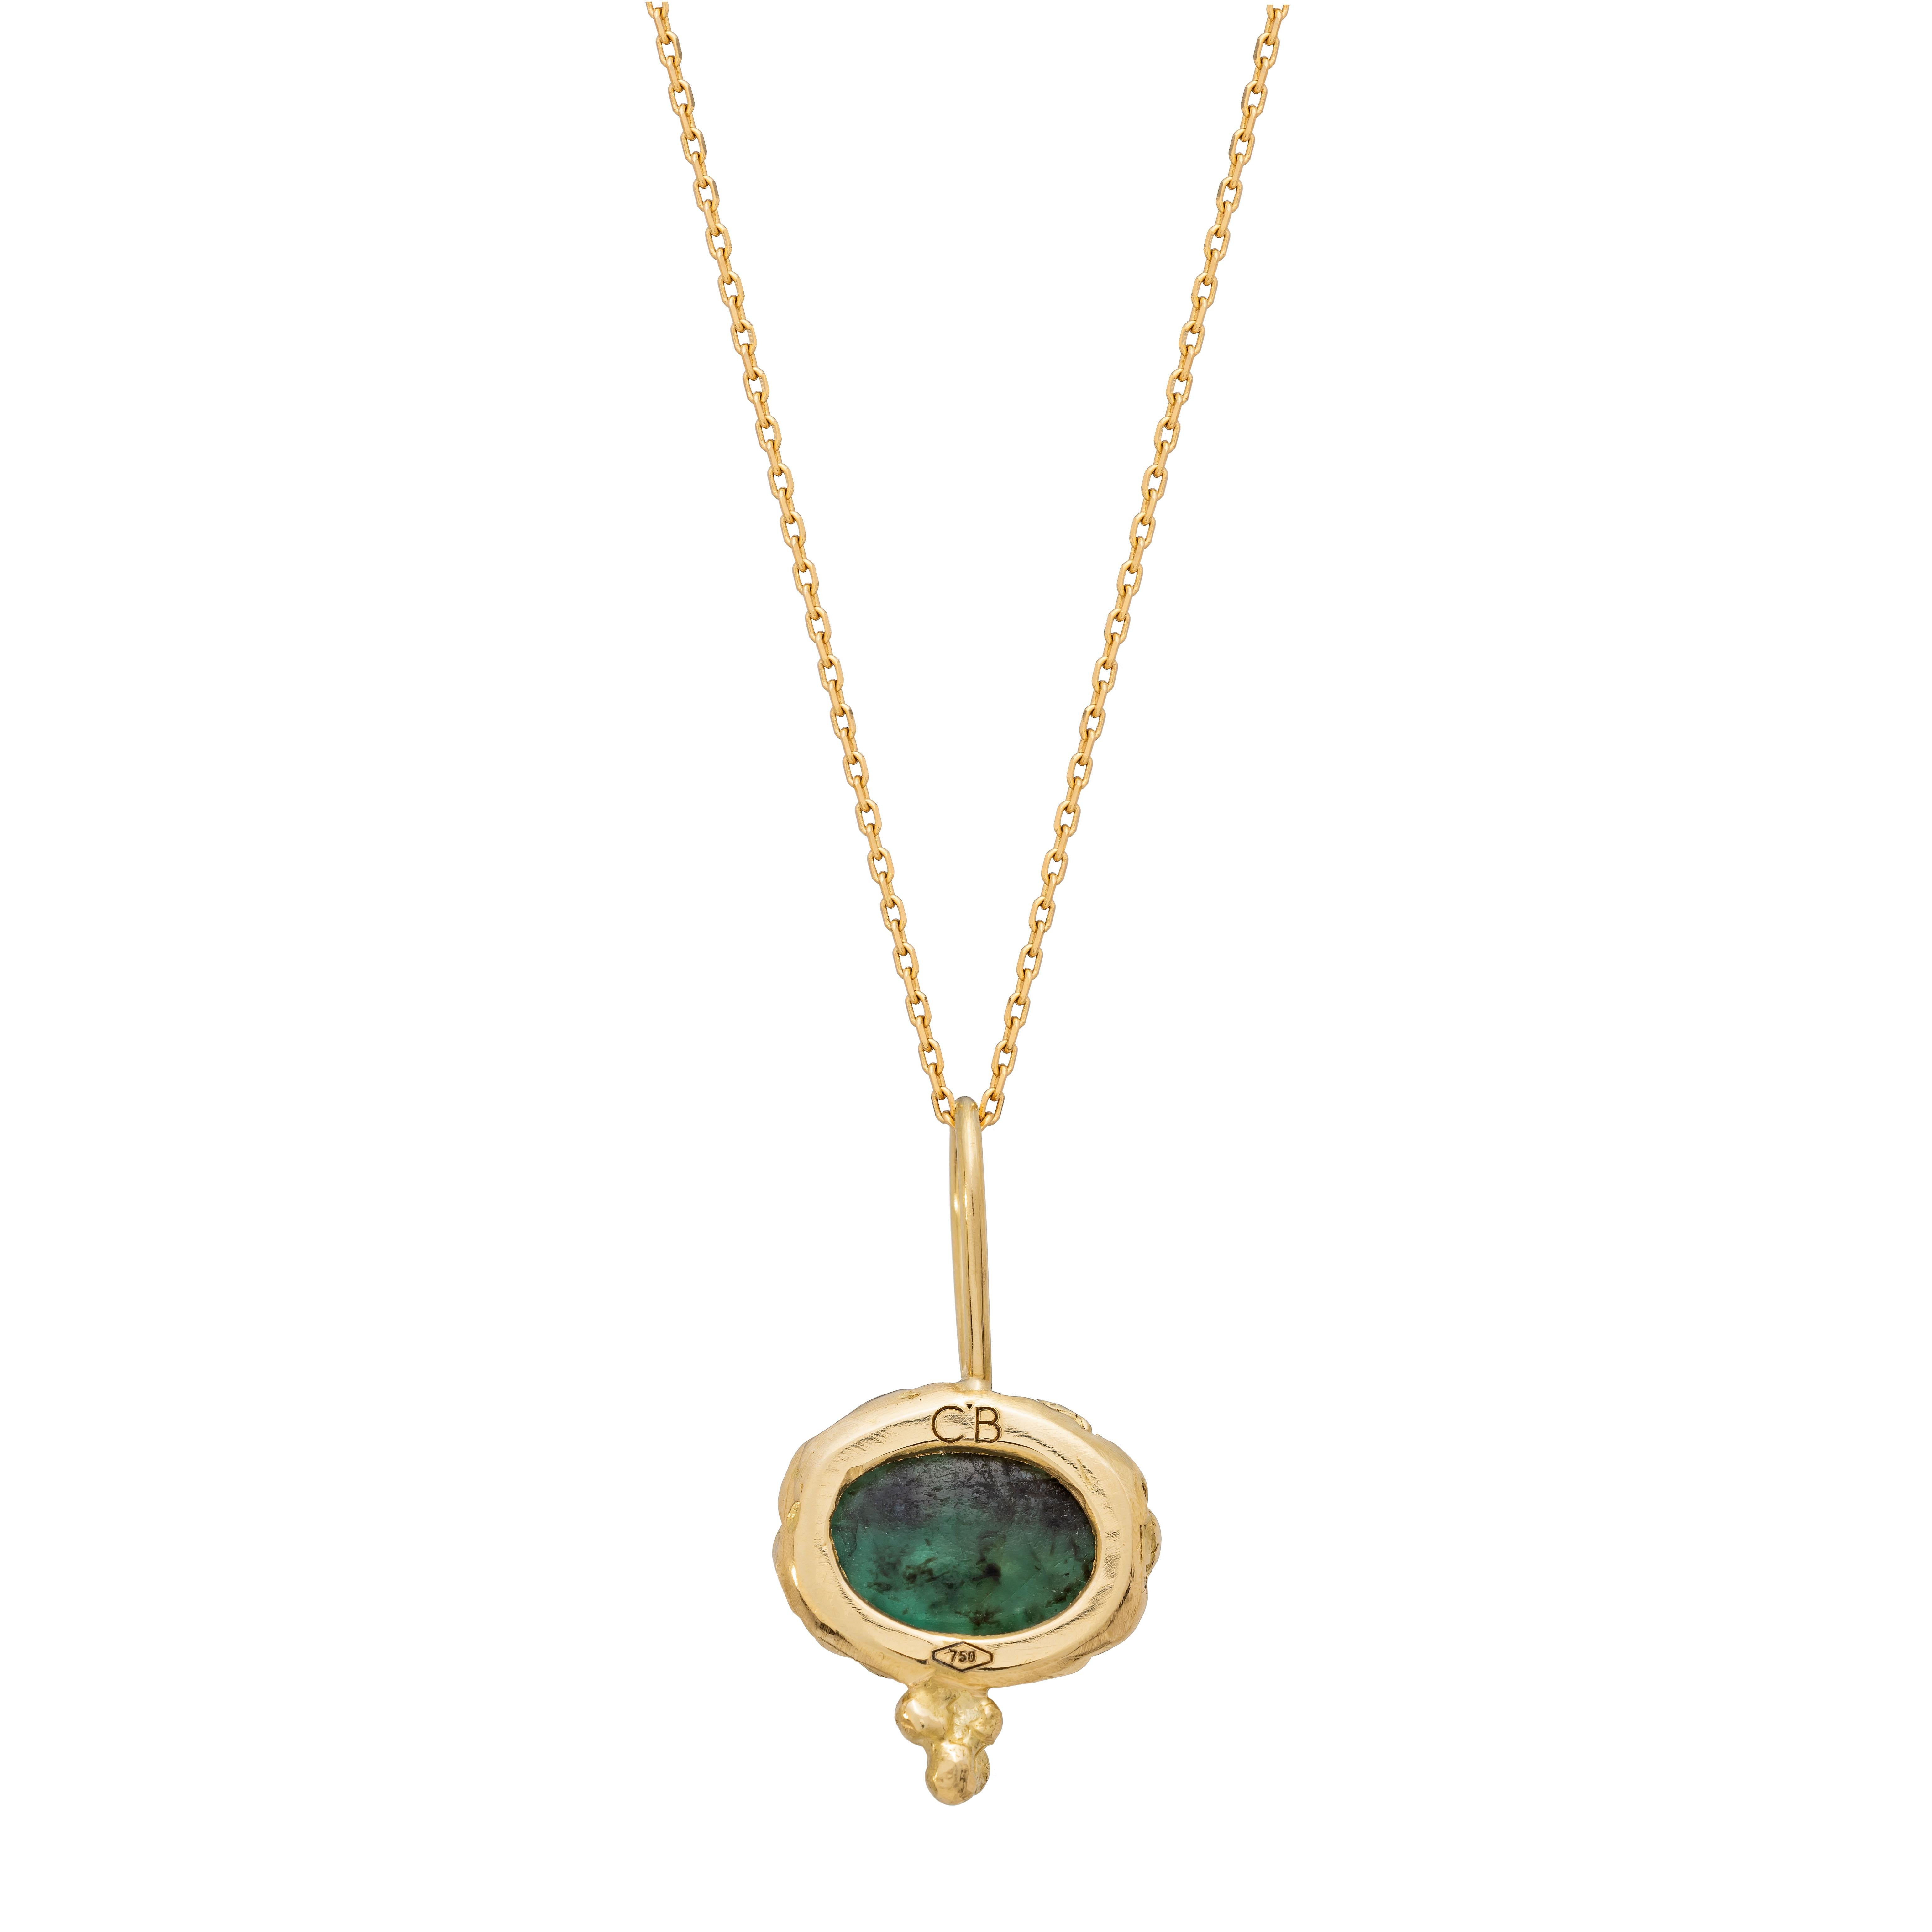 Ganymede Pendant in Agate, 18 Karat Yellow Gold.
The Relic Collection pieces are one off, hand etched pendants. Each stone is individually engraved by hand by artisans which means that every piece is truly one of a kind. These unique relics are then